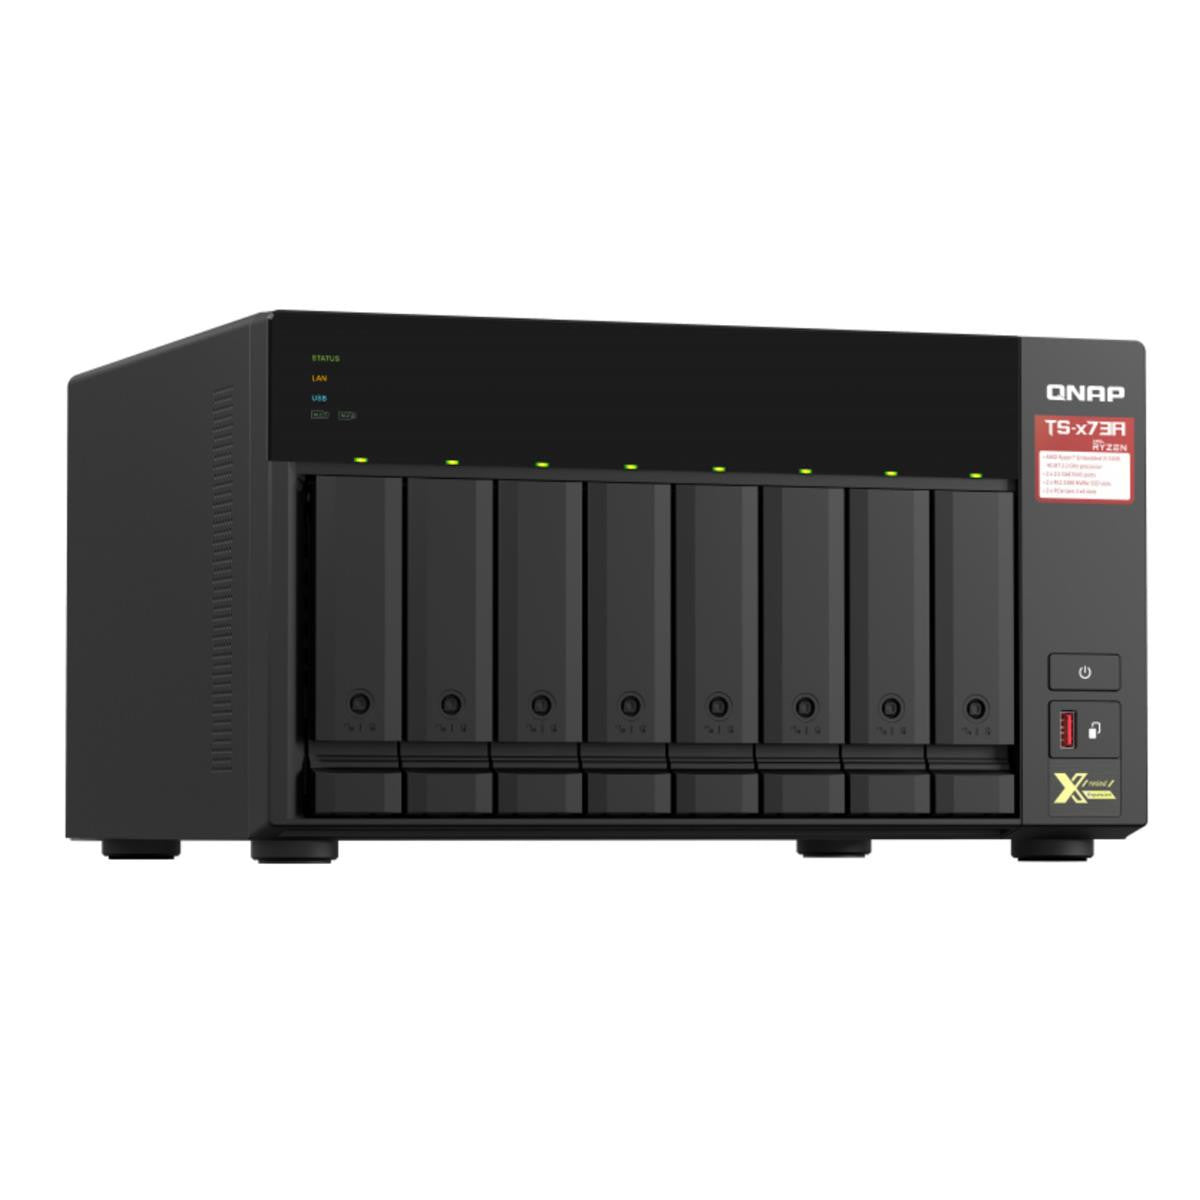 QNAP TS-873A 8-BAY NAS with 32GB DDR4 RAM and 64TB (8x8TB) Western Digital RED PLUS Drives Fully Assembled and Tested